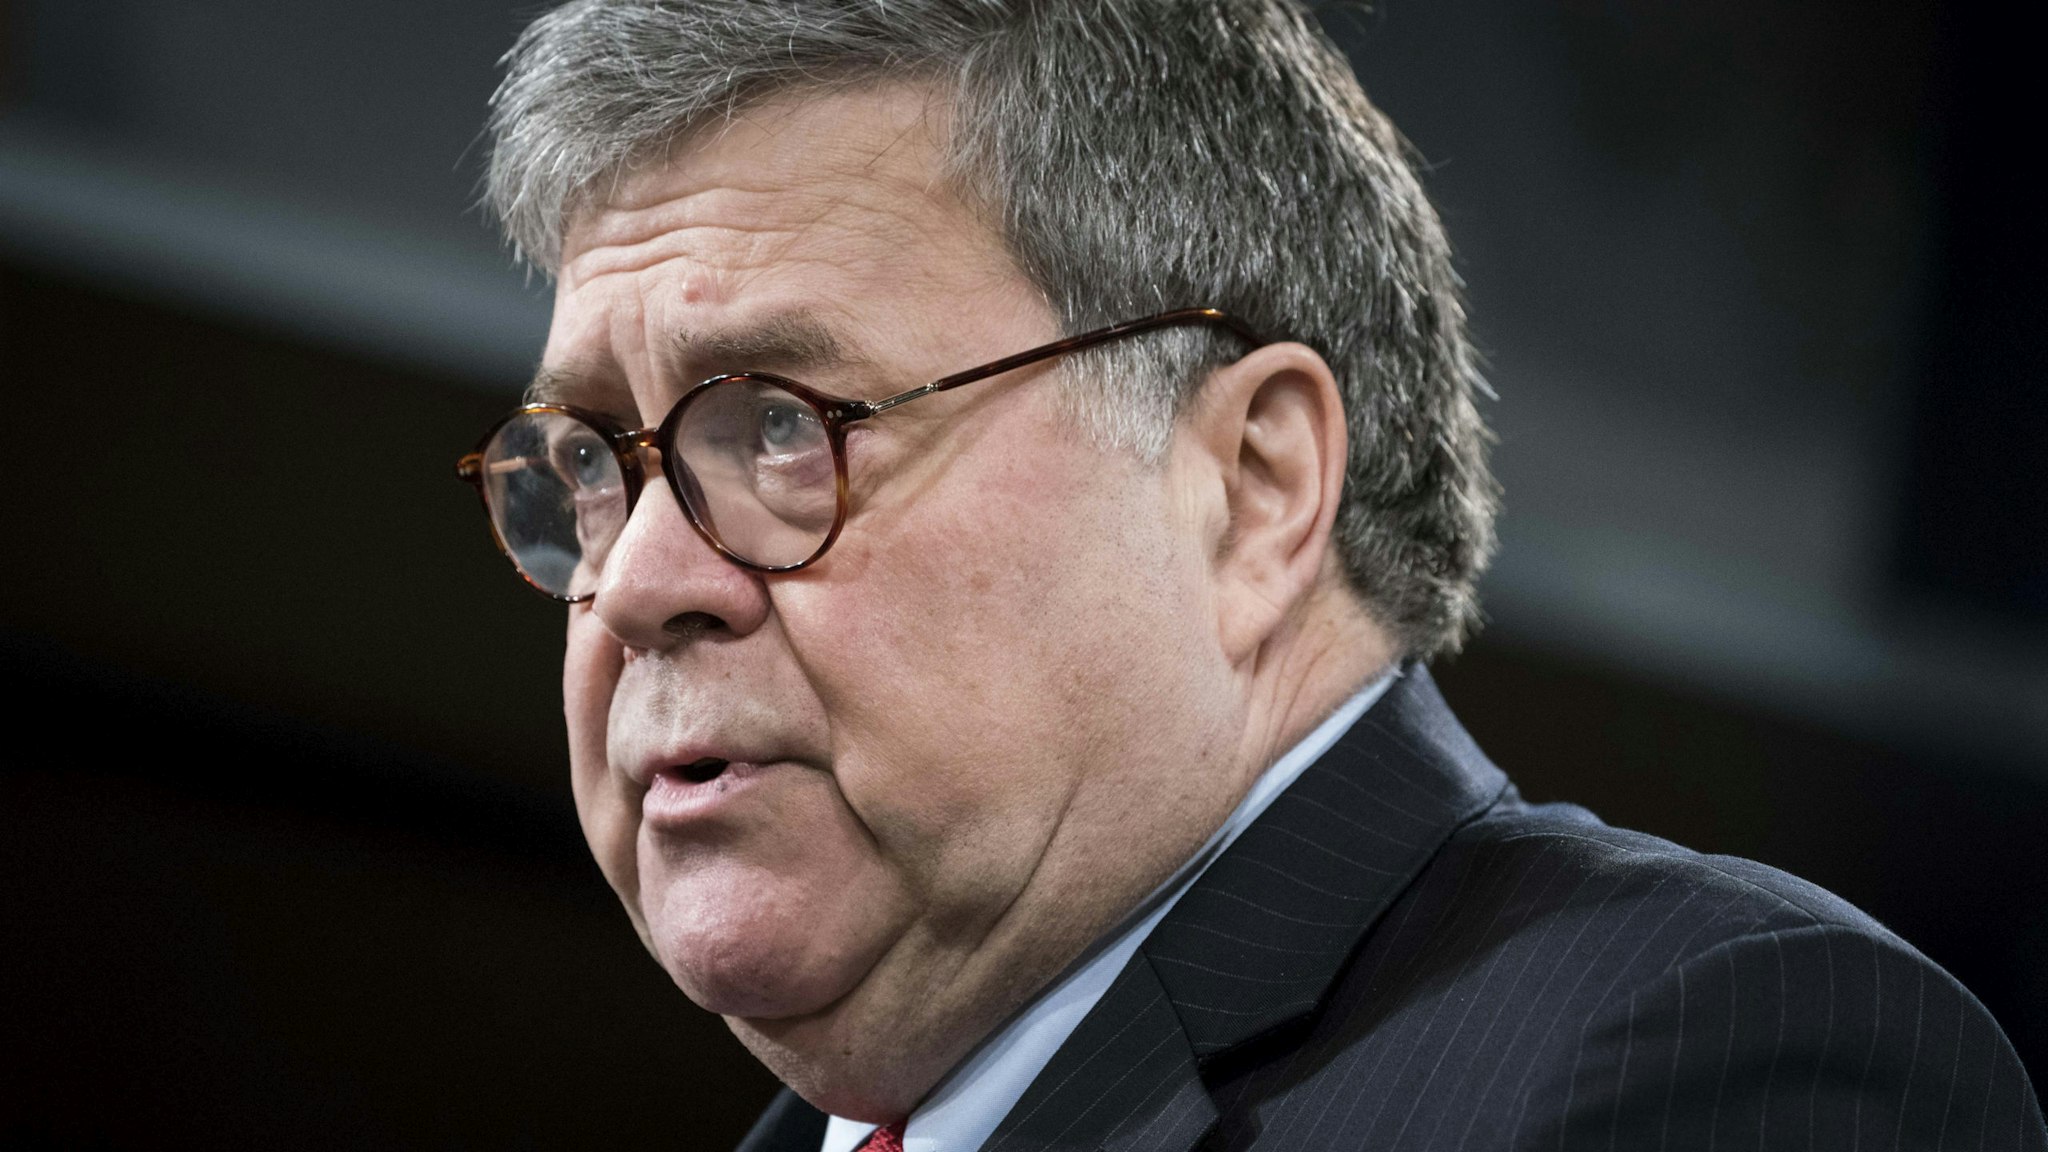 WASHINGTON, DC - FEBRUARY 10: Attorney General William Barr participates in a press conference at the Department of Justice on February 10, 2020 in Washington, DC. Barr announced the indictment of four members of China's military on charges of hacking into Equifax Inc. and stealing data from millions of Americans.